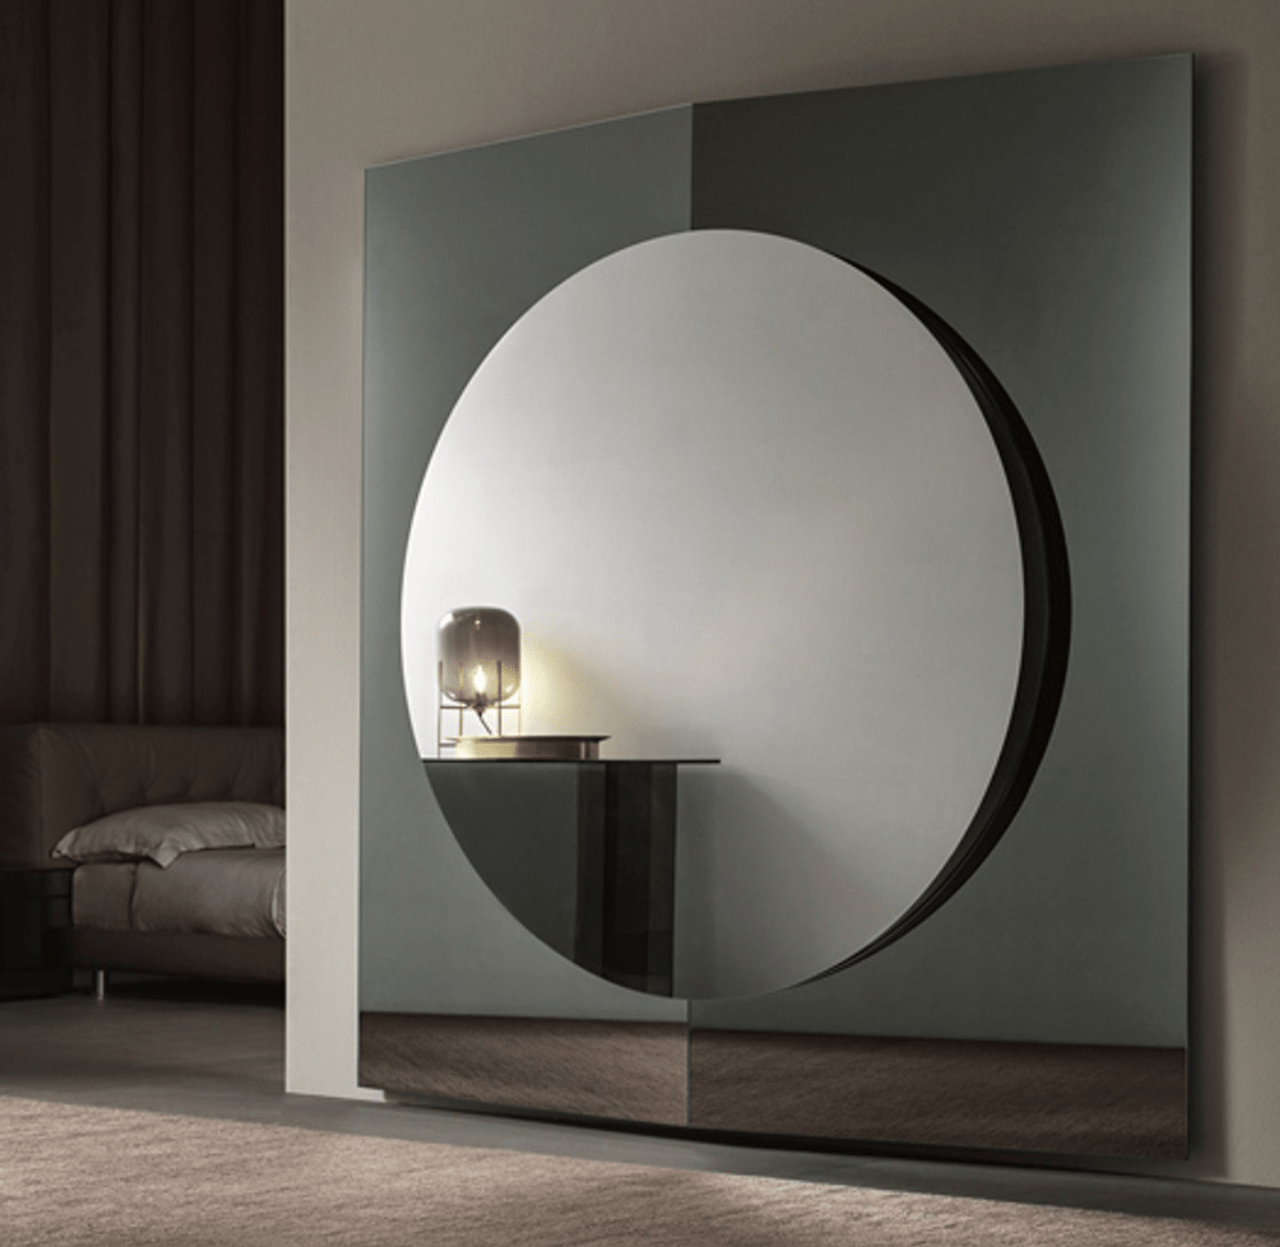 Central Wall Mirror